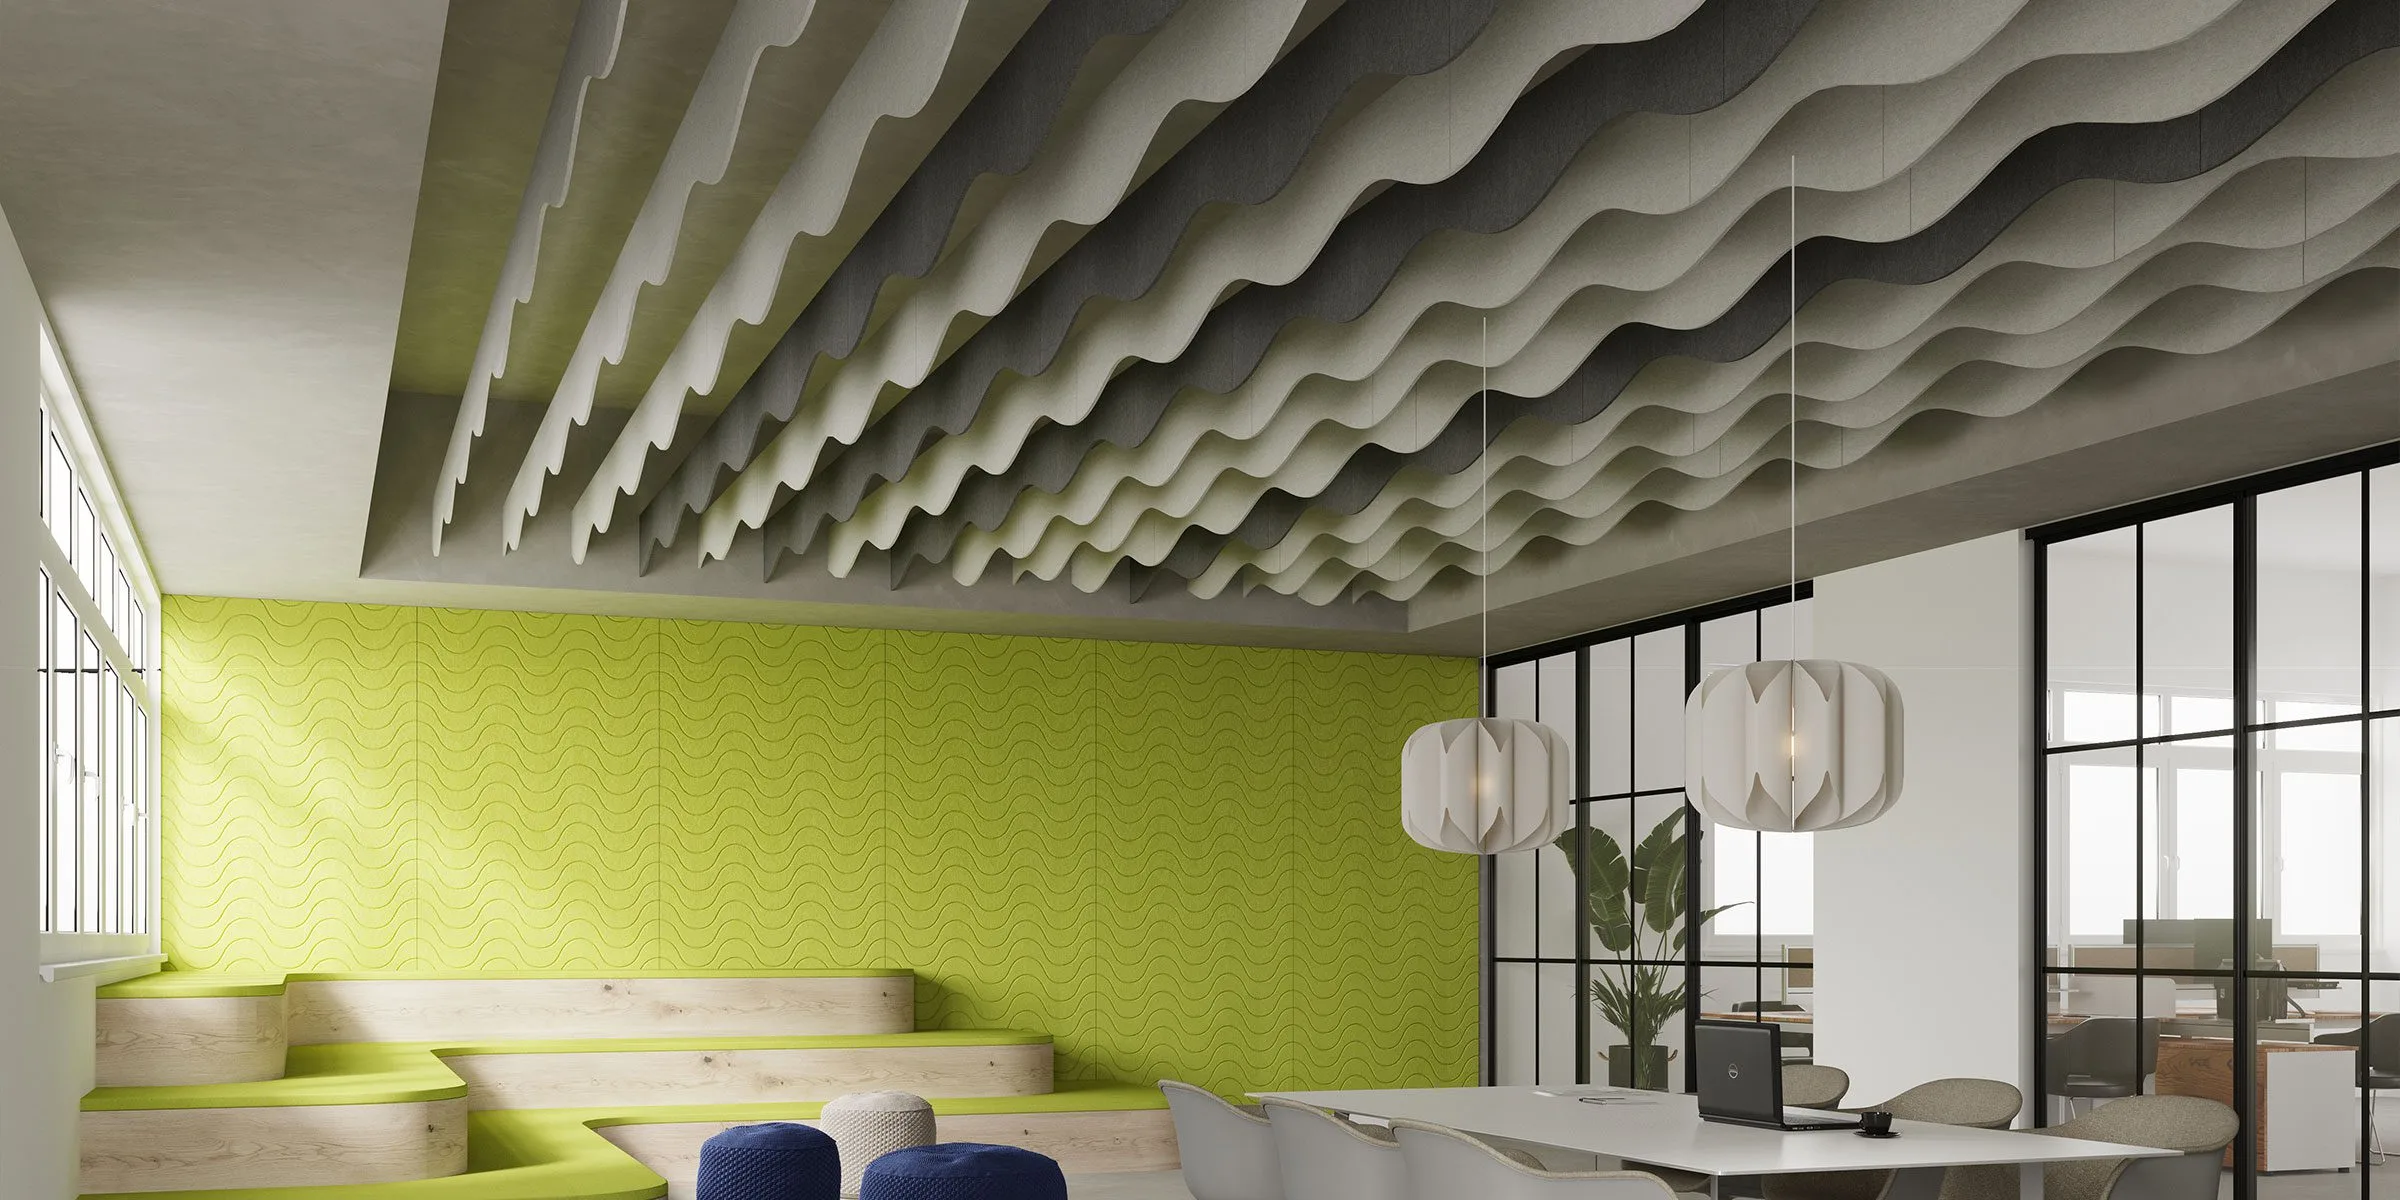 The Benefits of Acoustic Ceiling Baffles: An In-Depth Look